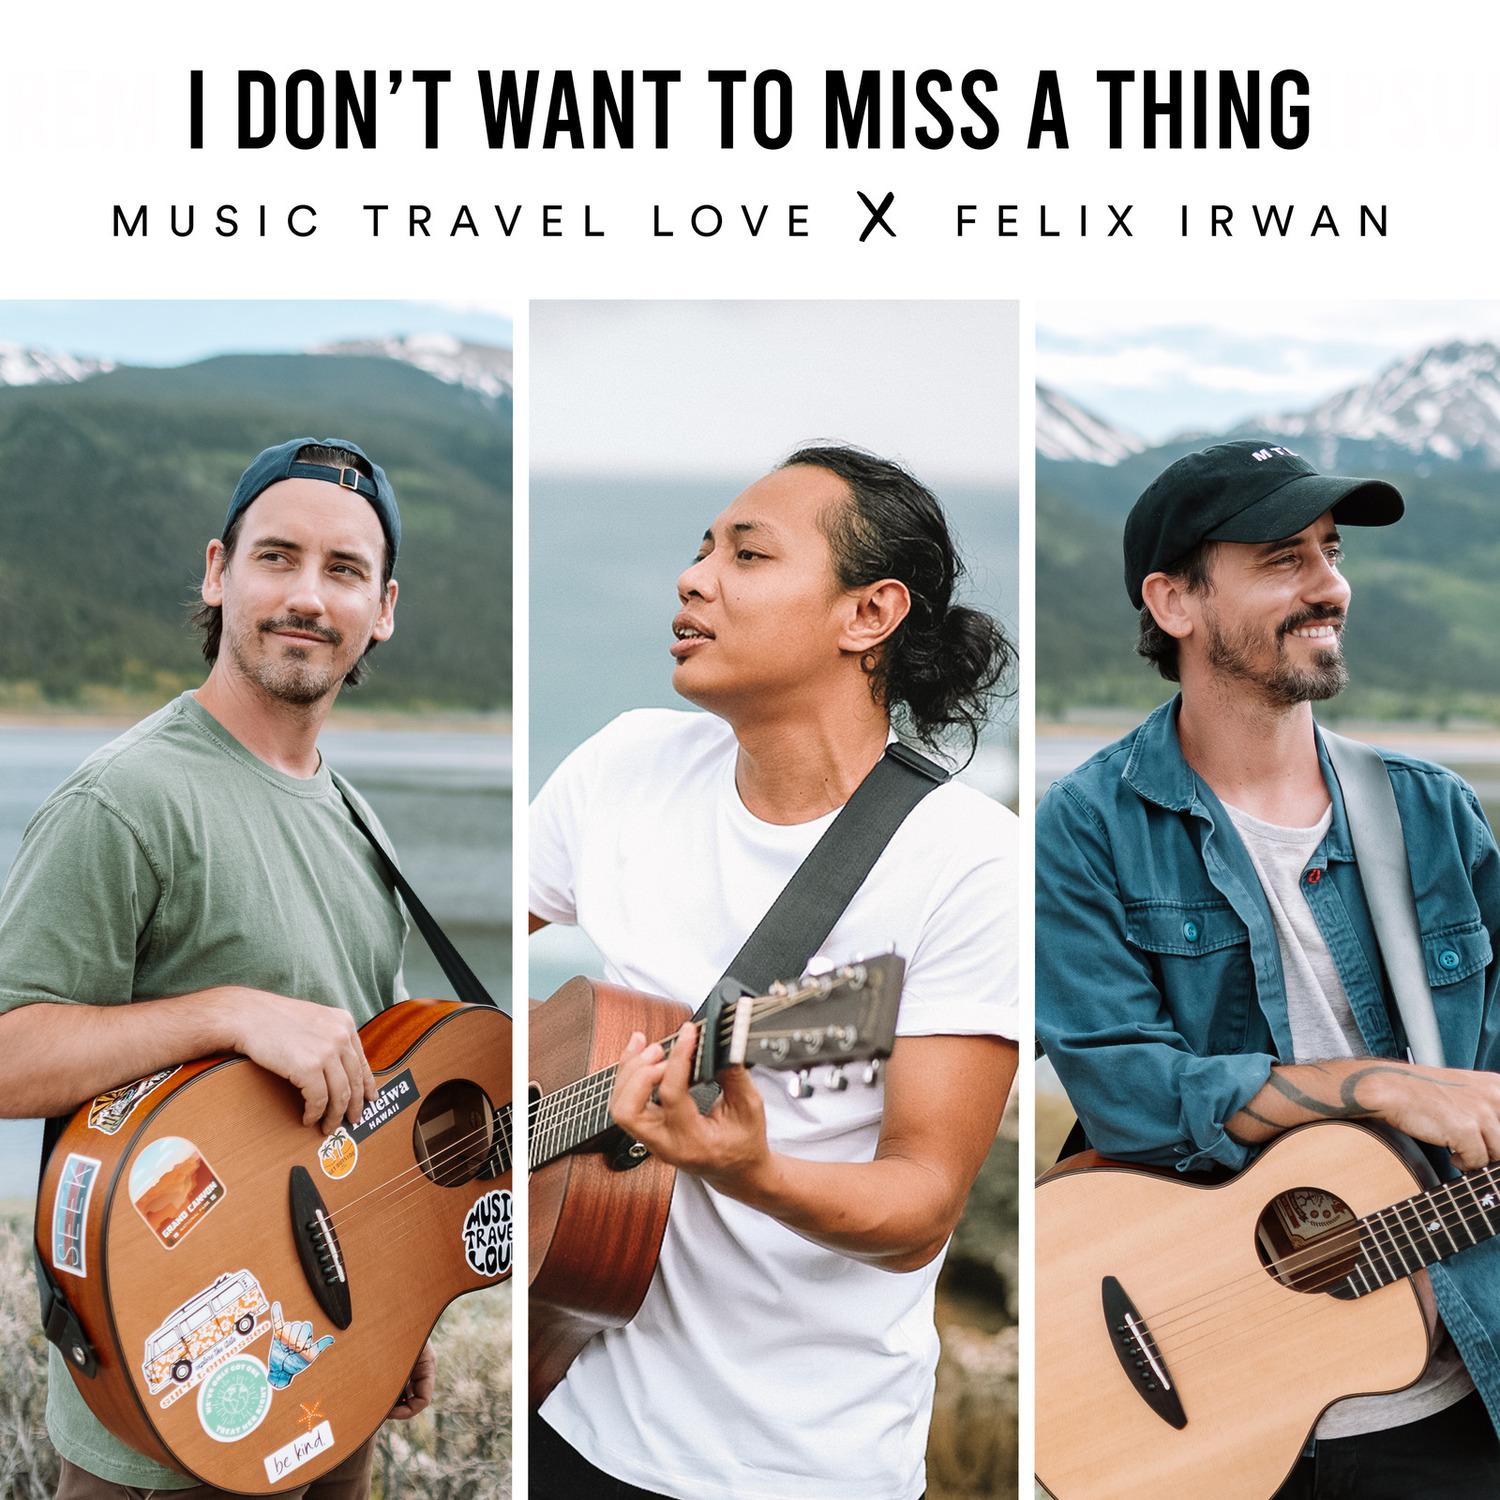 Music Travel Love - I Don't Want to Miss a Thing